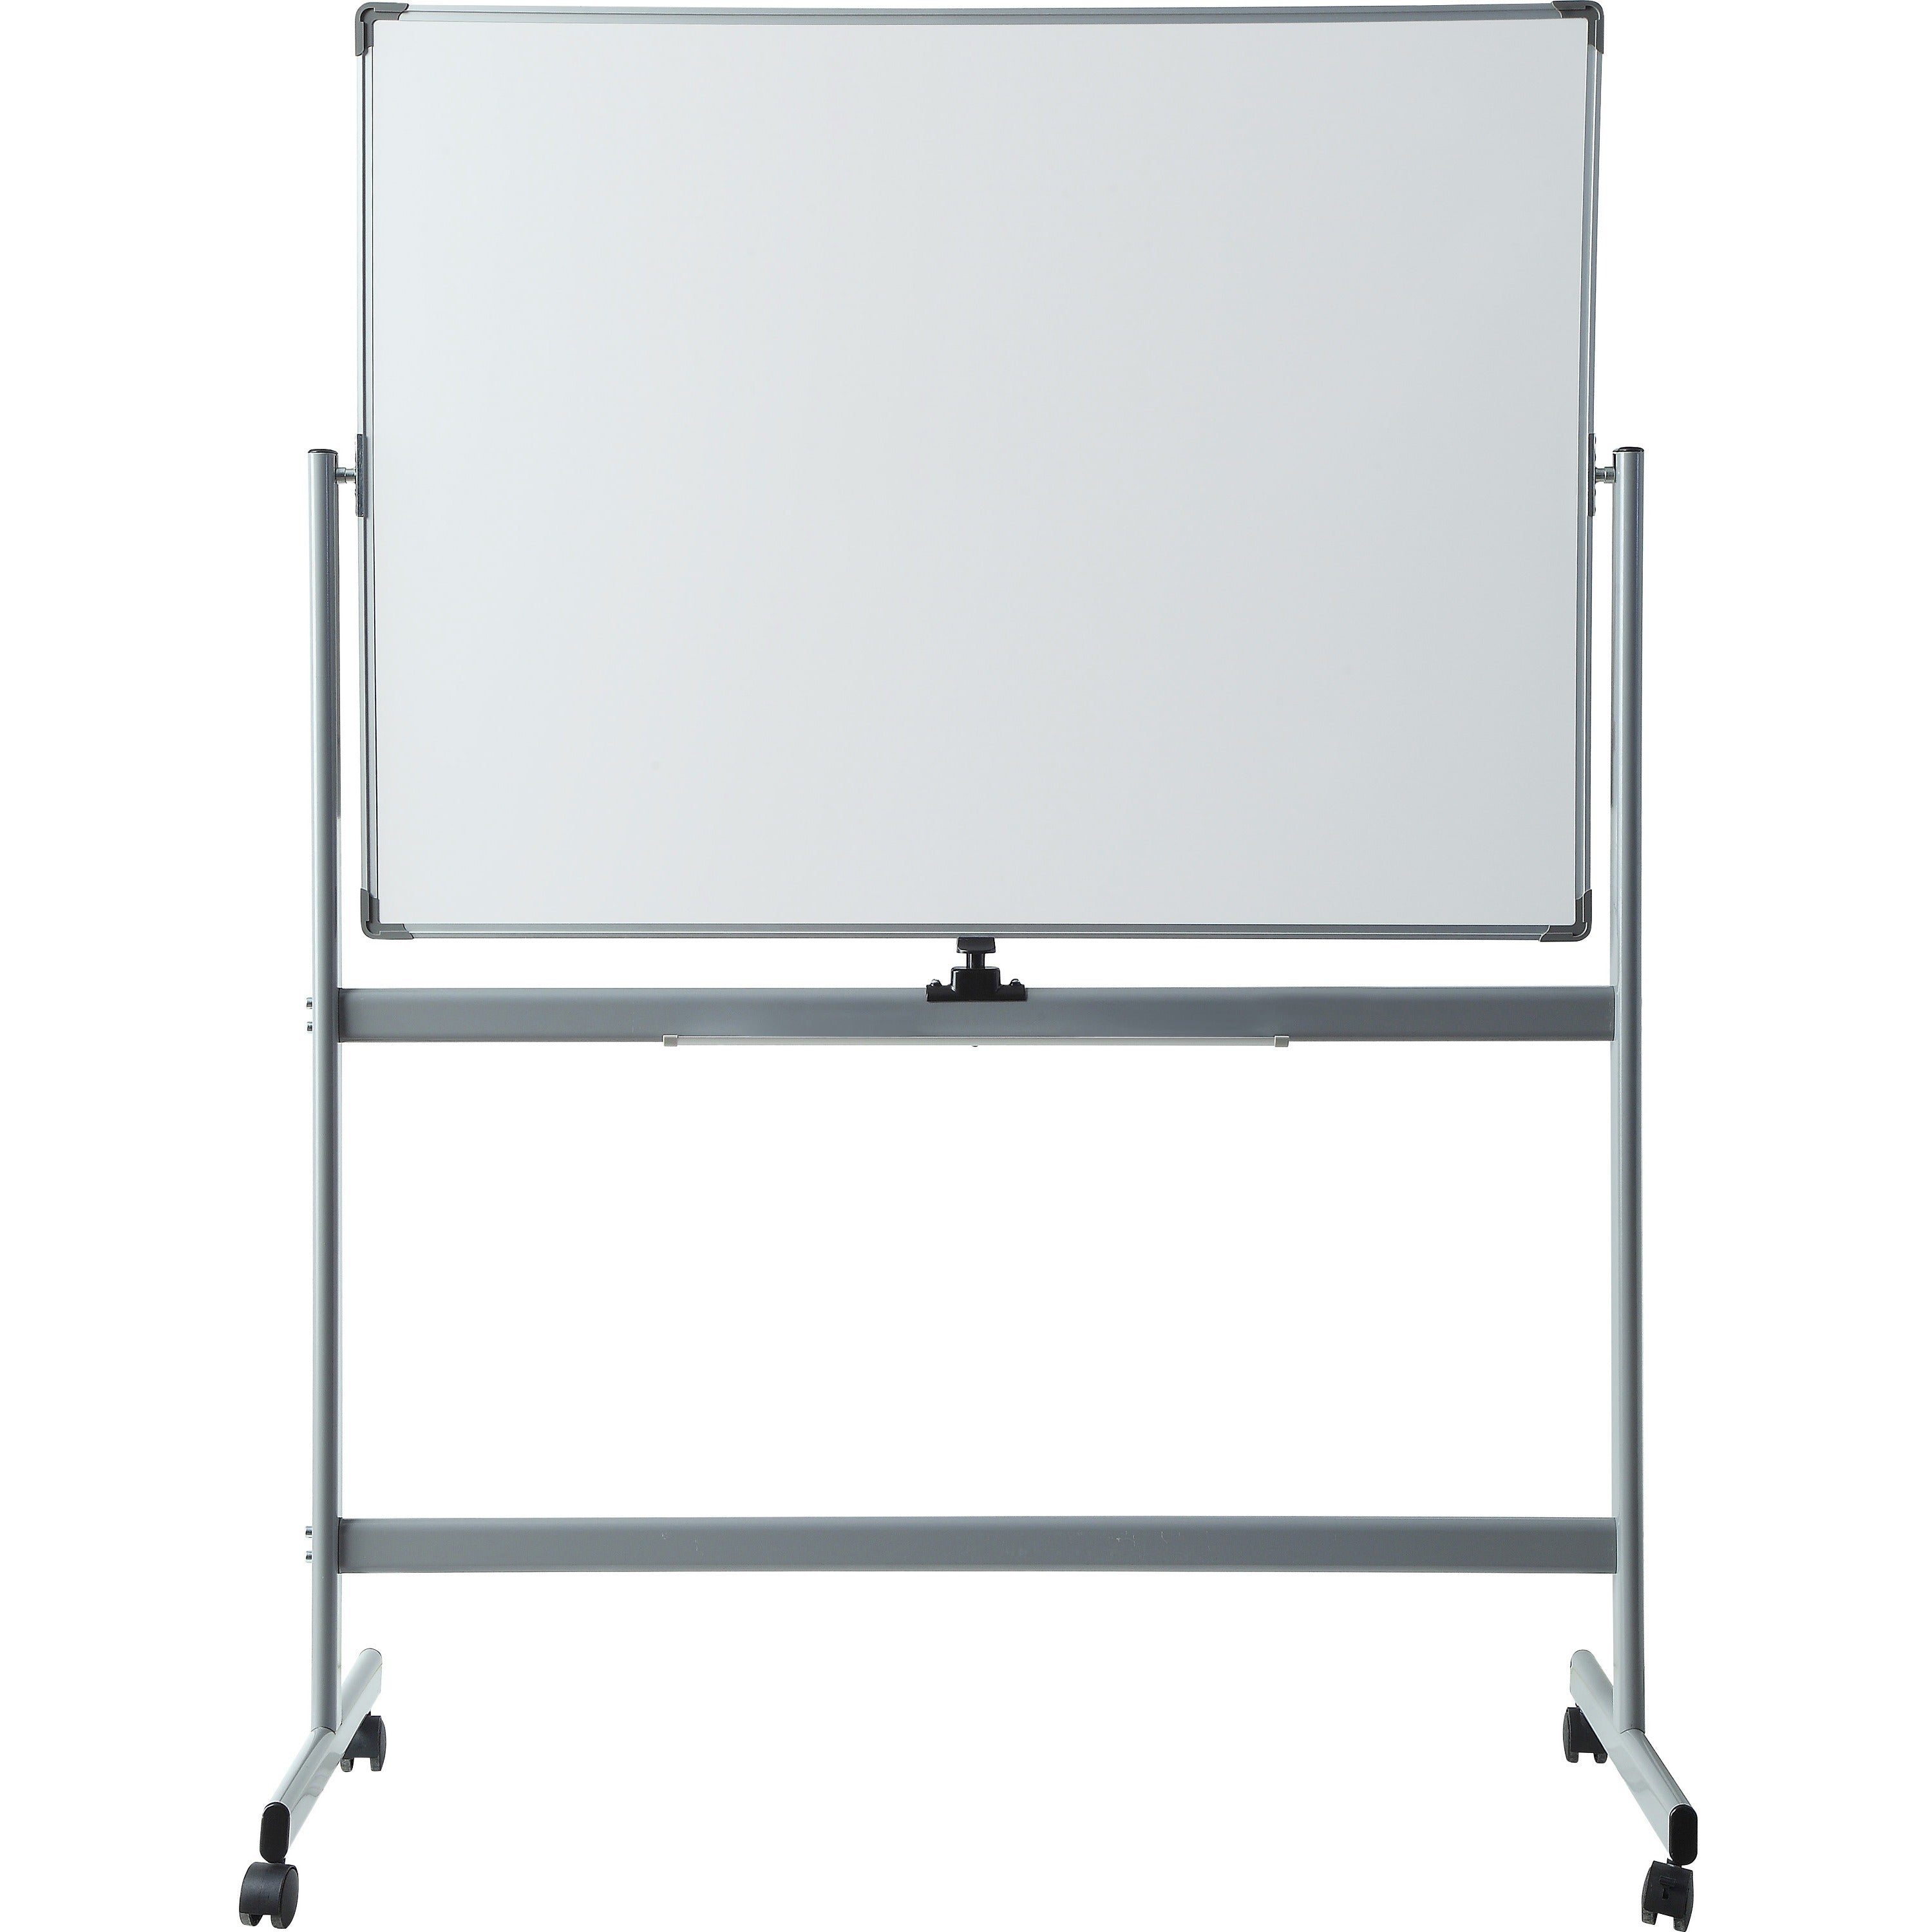 lorell-double-sided-magnetic-whiteboard-easel-48-4-ft-width-x-36-3-ft-height-white-surface-rectangle-floor-standing-magnetic-1-each_llr52568 - 2